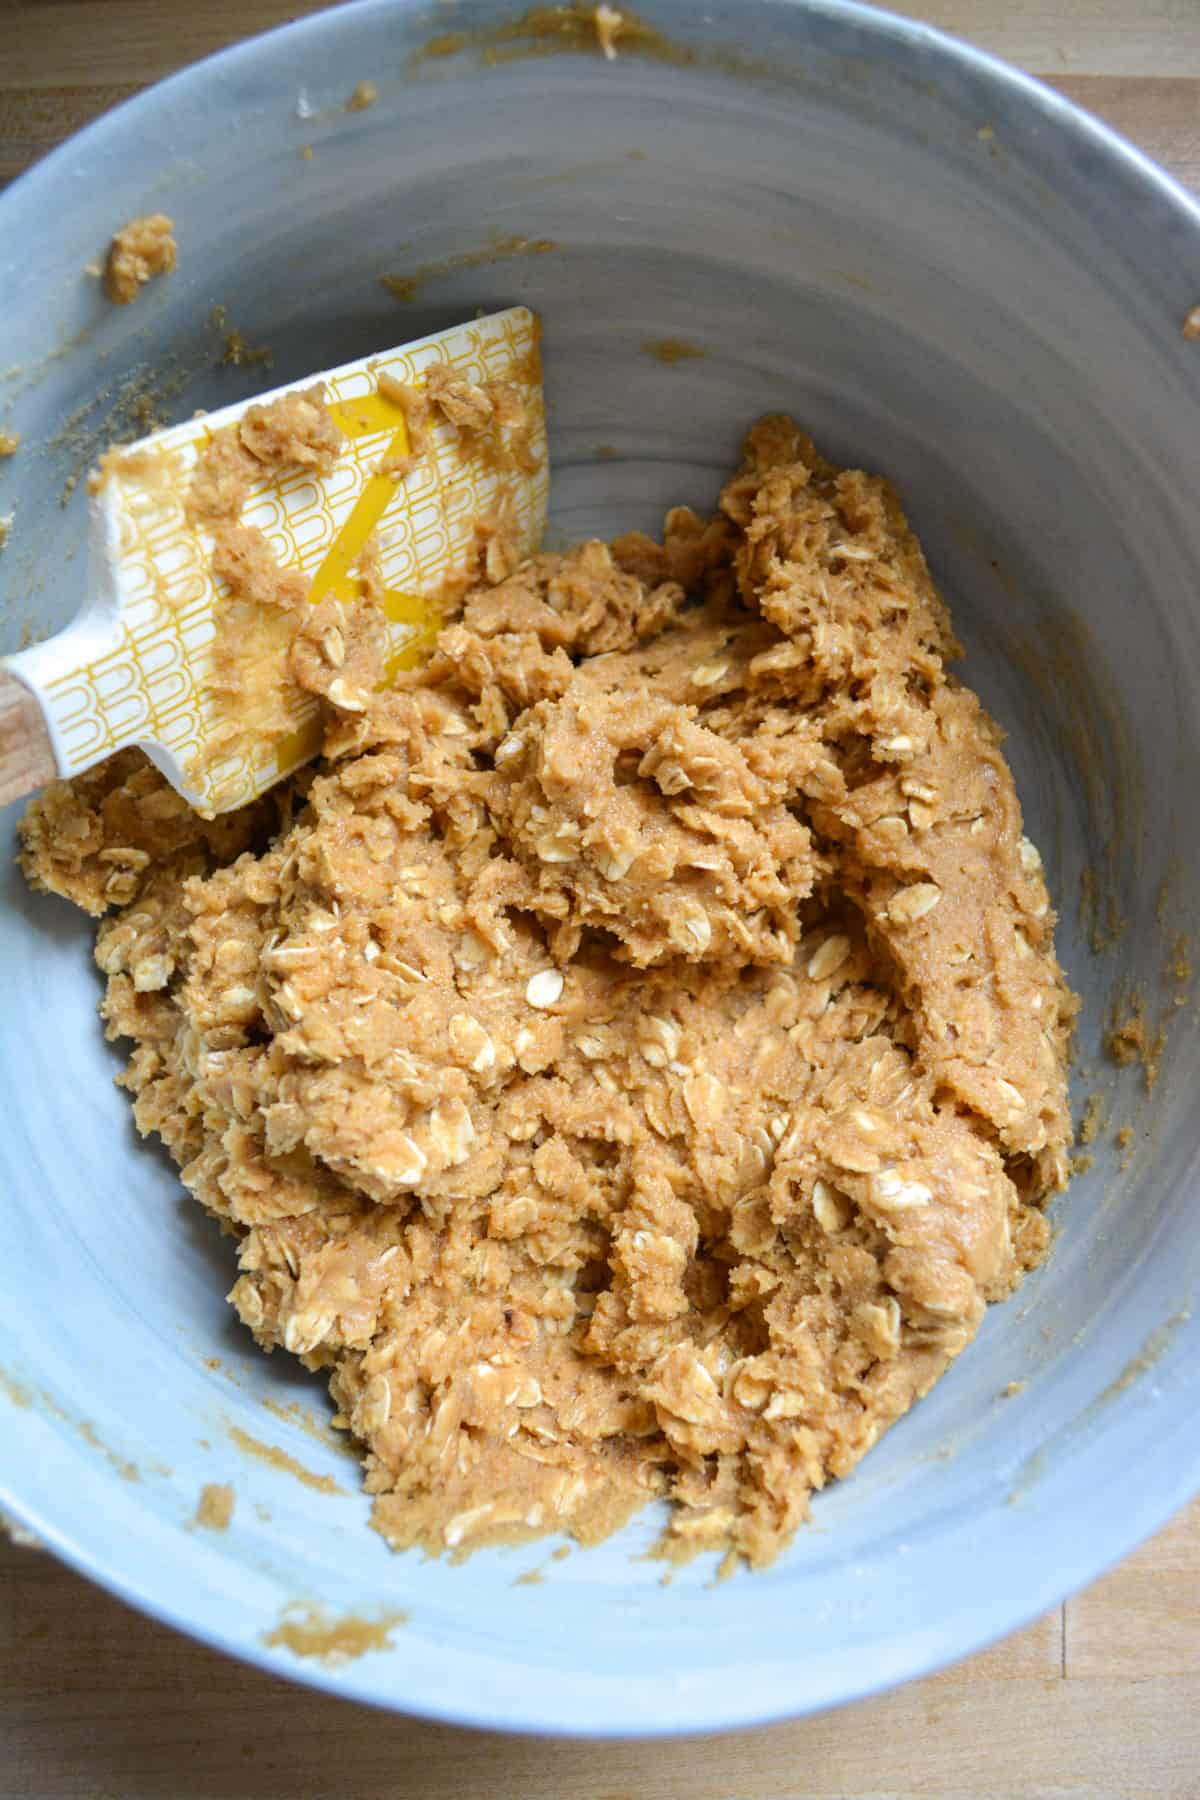 Flour and oats added into the peanut butter mixture to form the cookie dough.